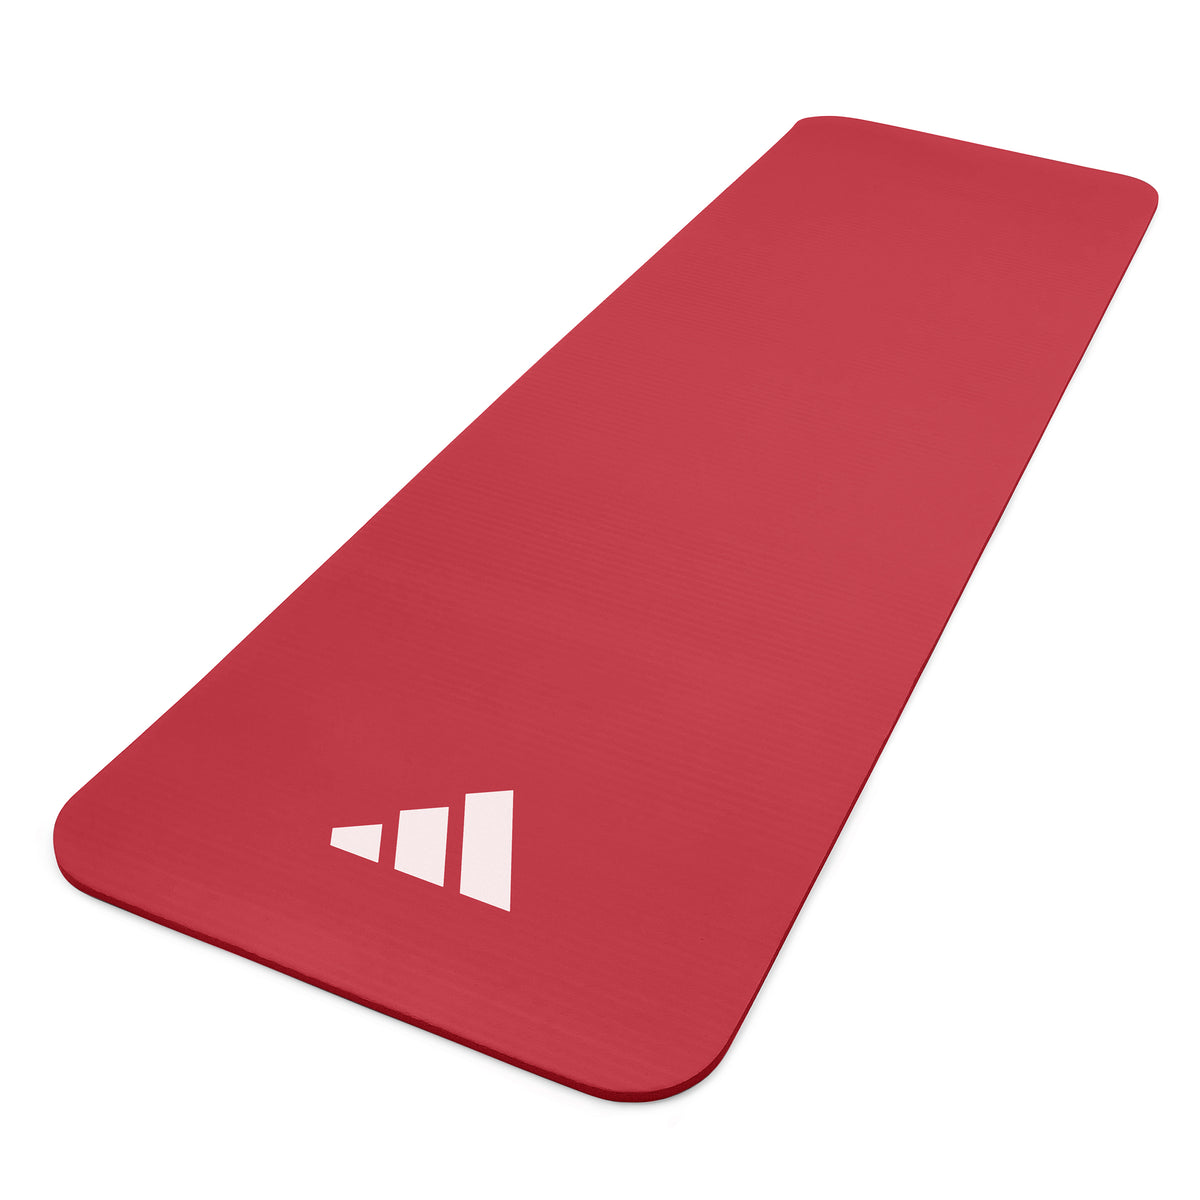 Adidas Fitness Mat - 10mm Red